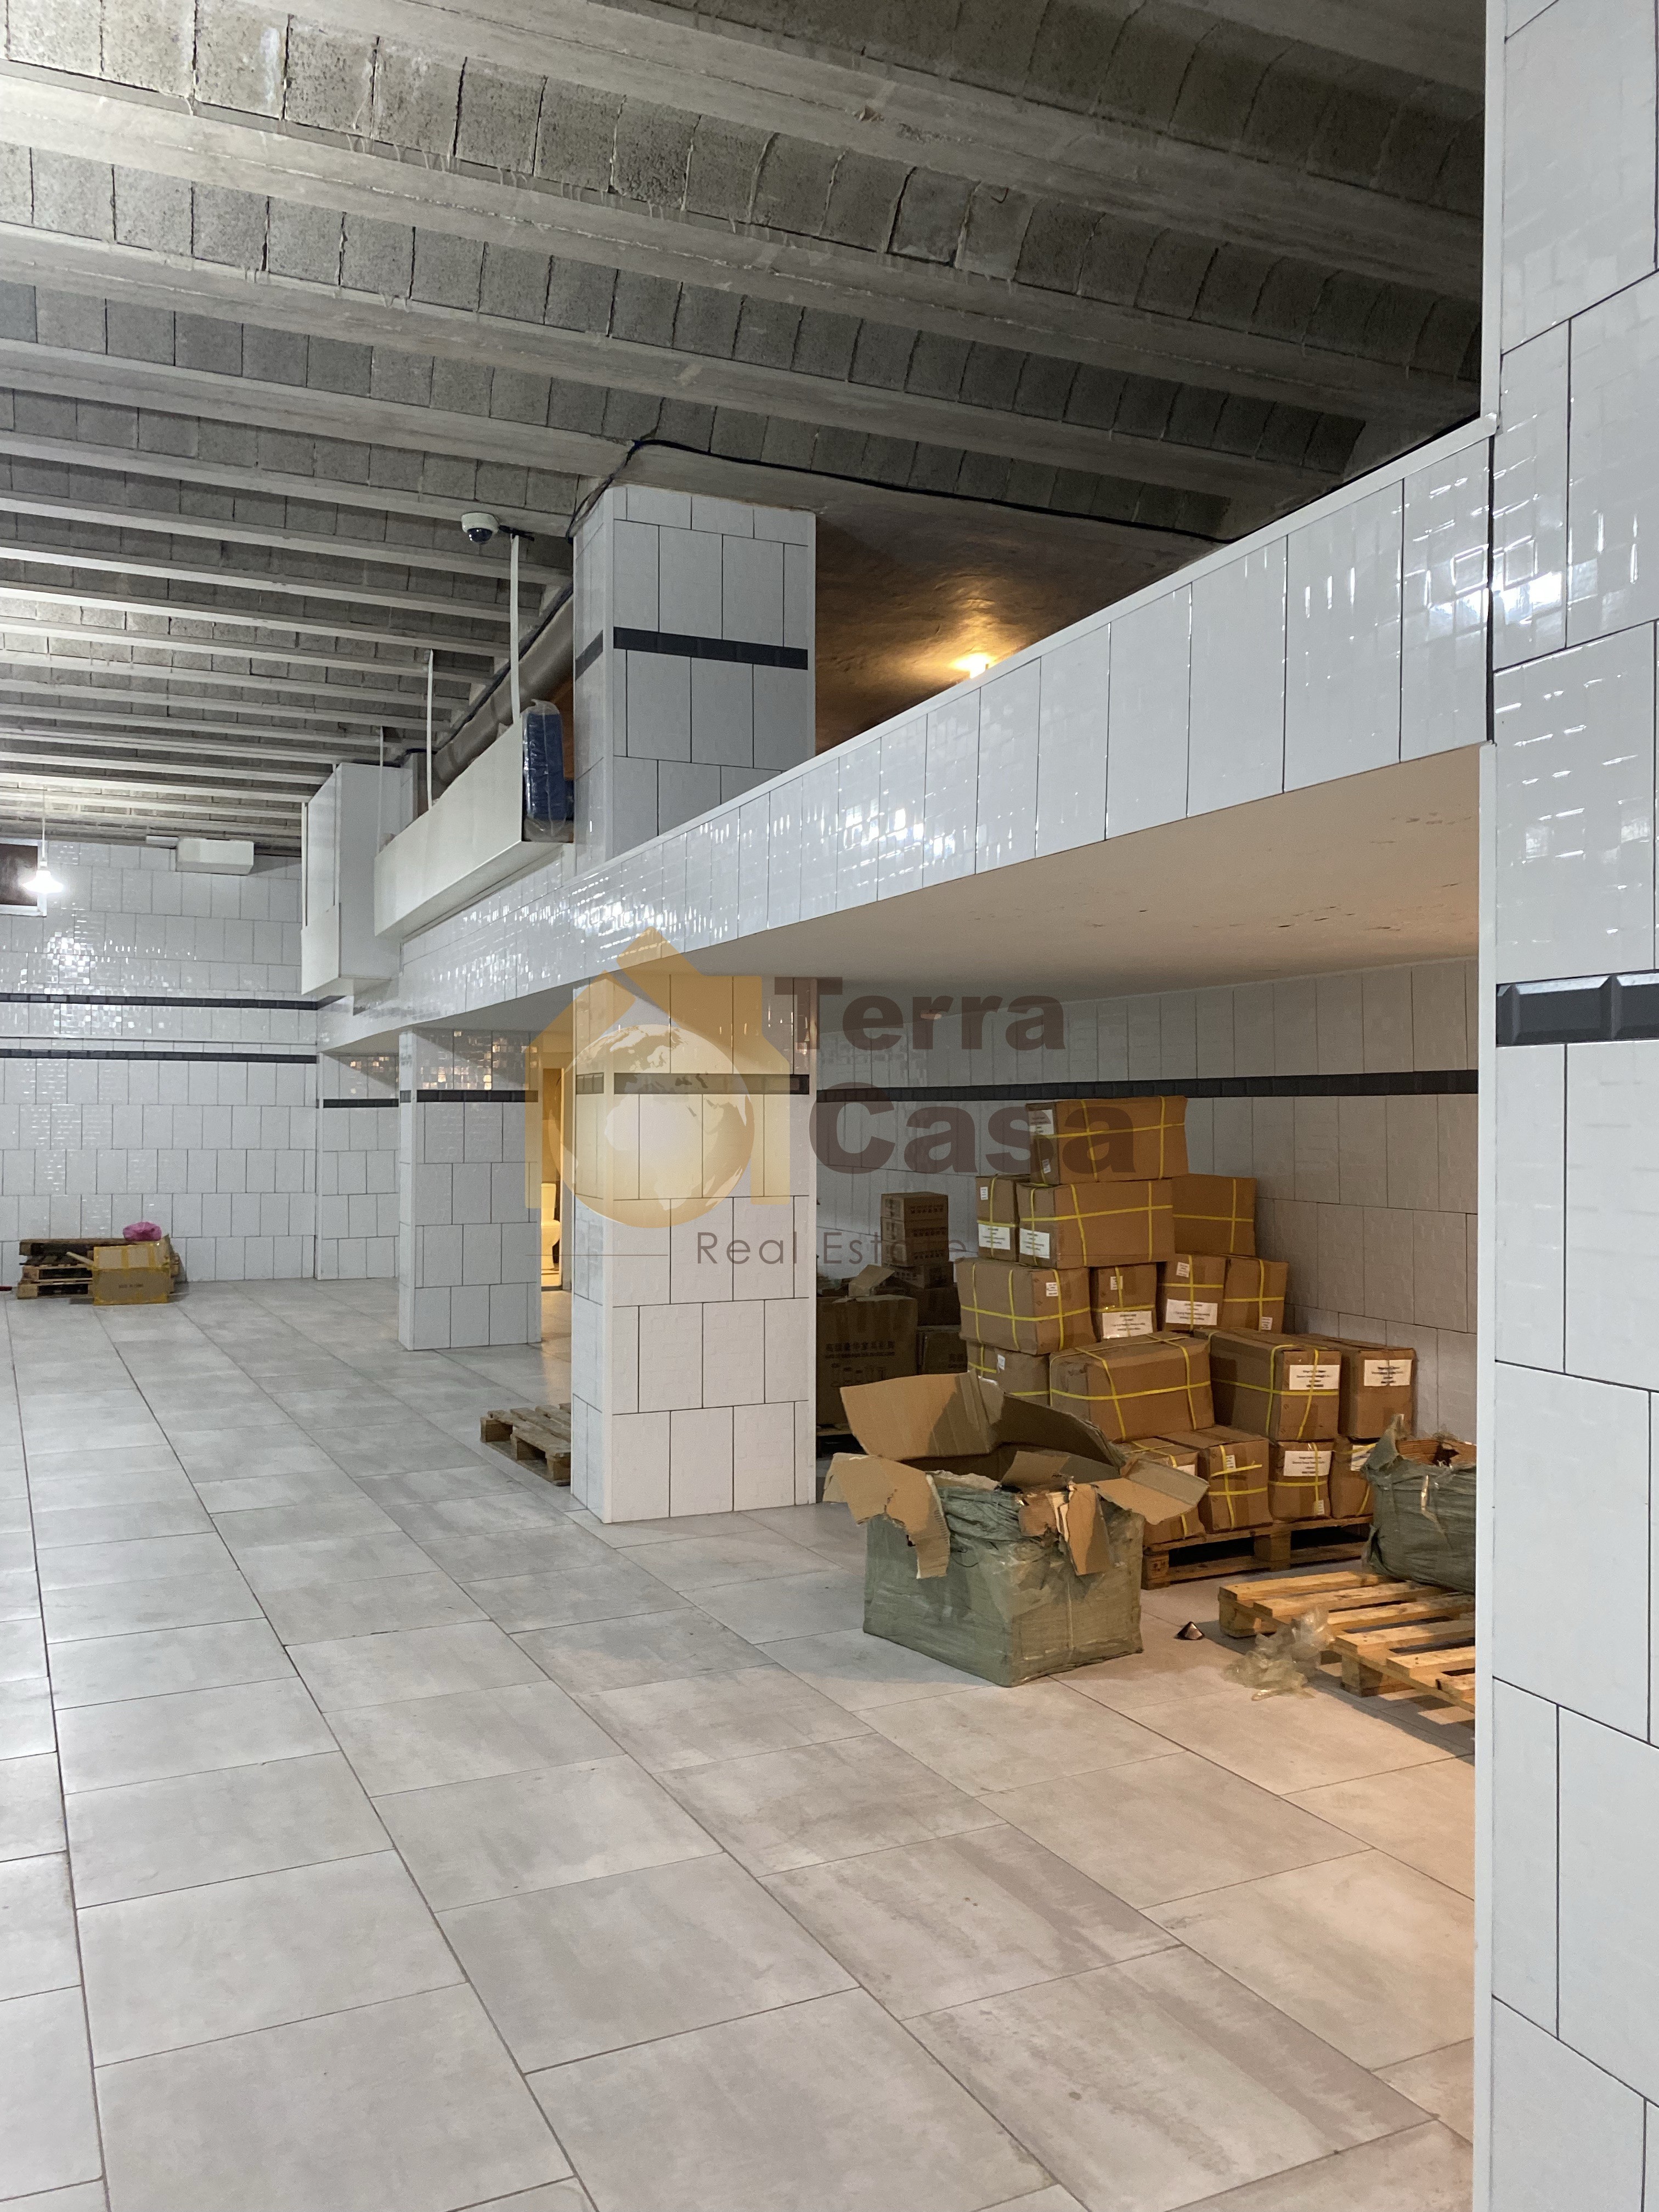 Warehouse for rent located in Zouk Mosbeh